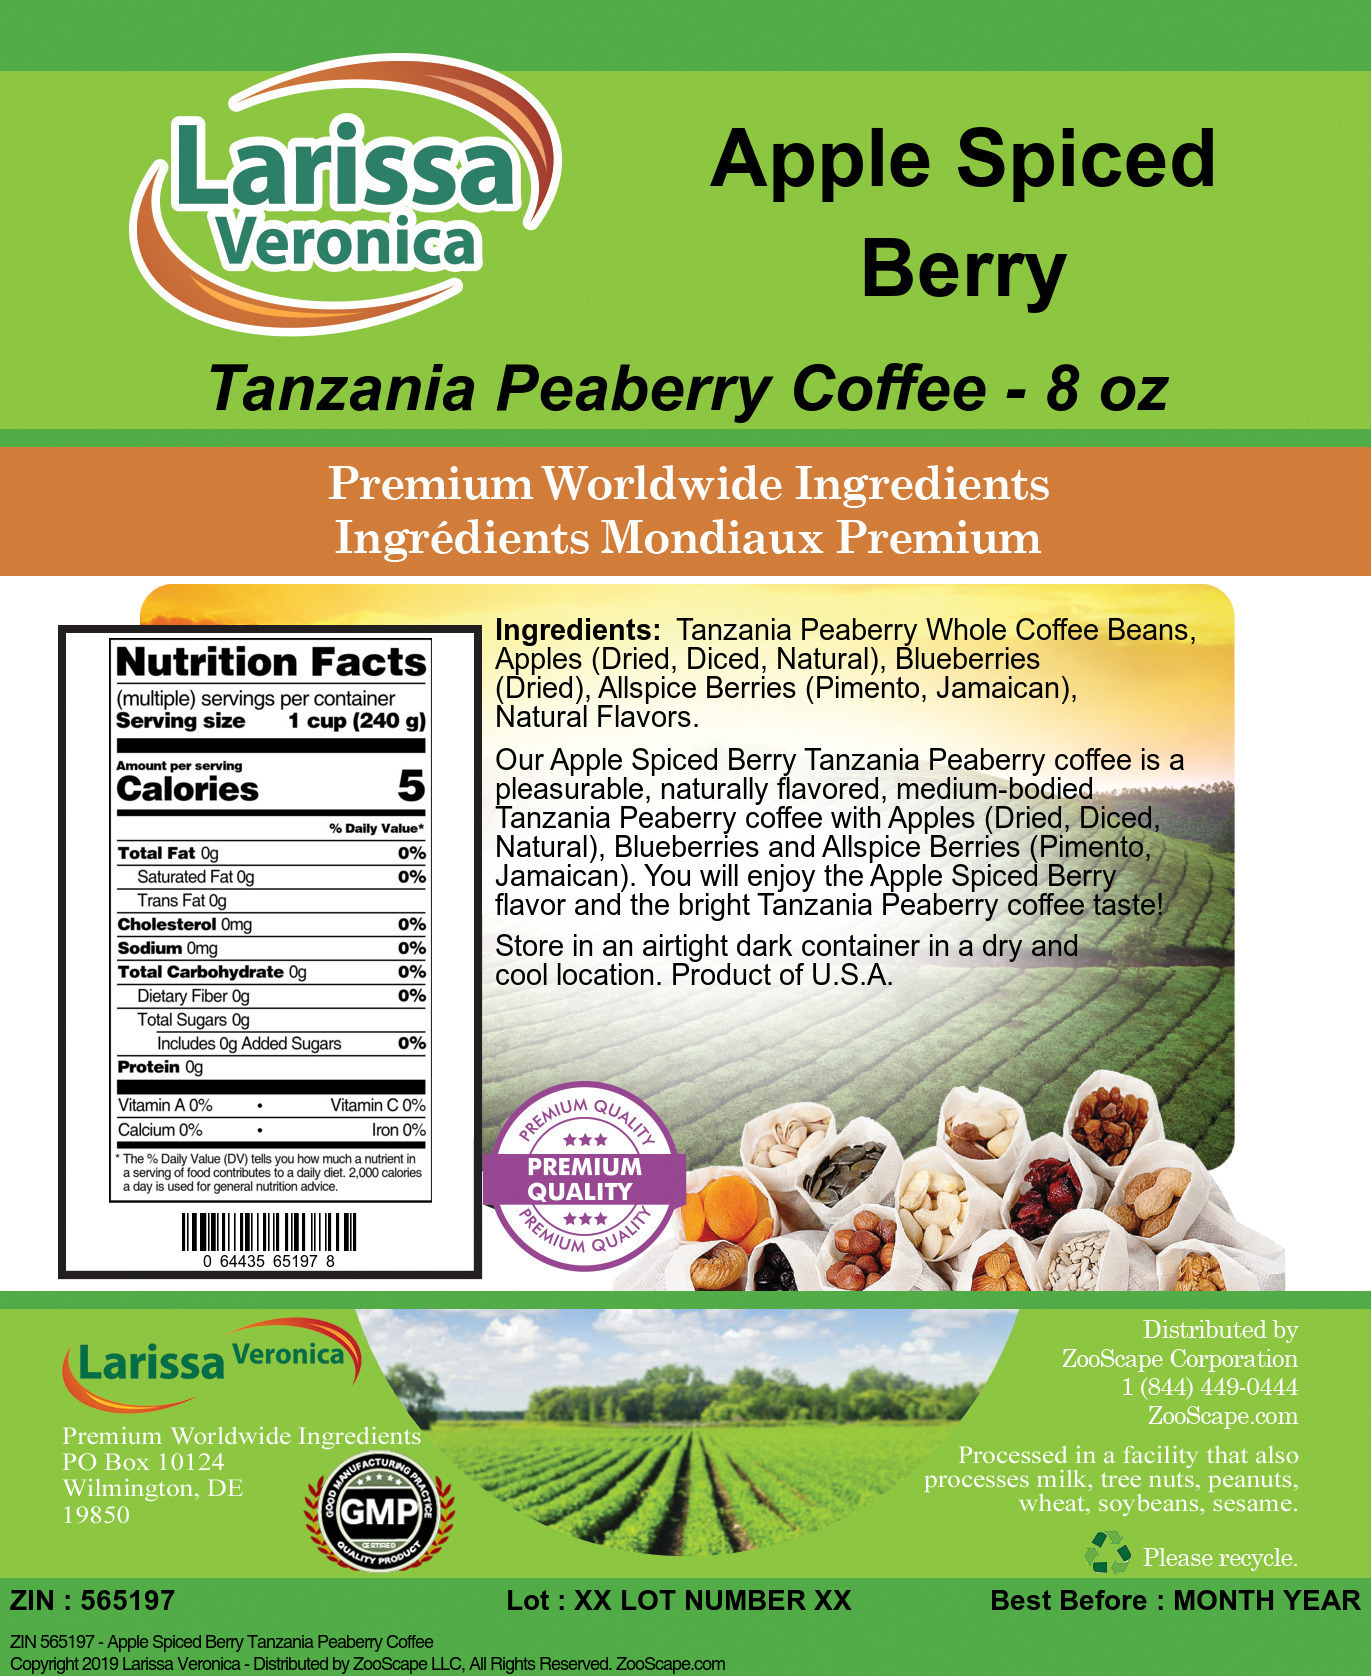 Apple Spiced Berry Tanzania Peaberry Coffee - Label